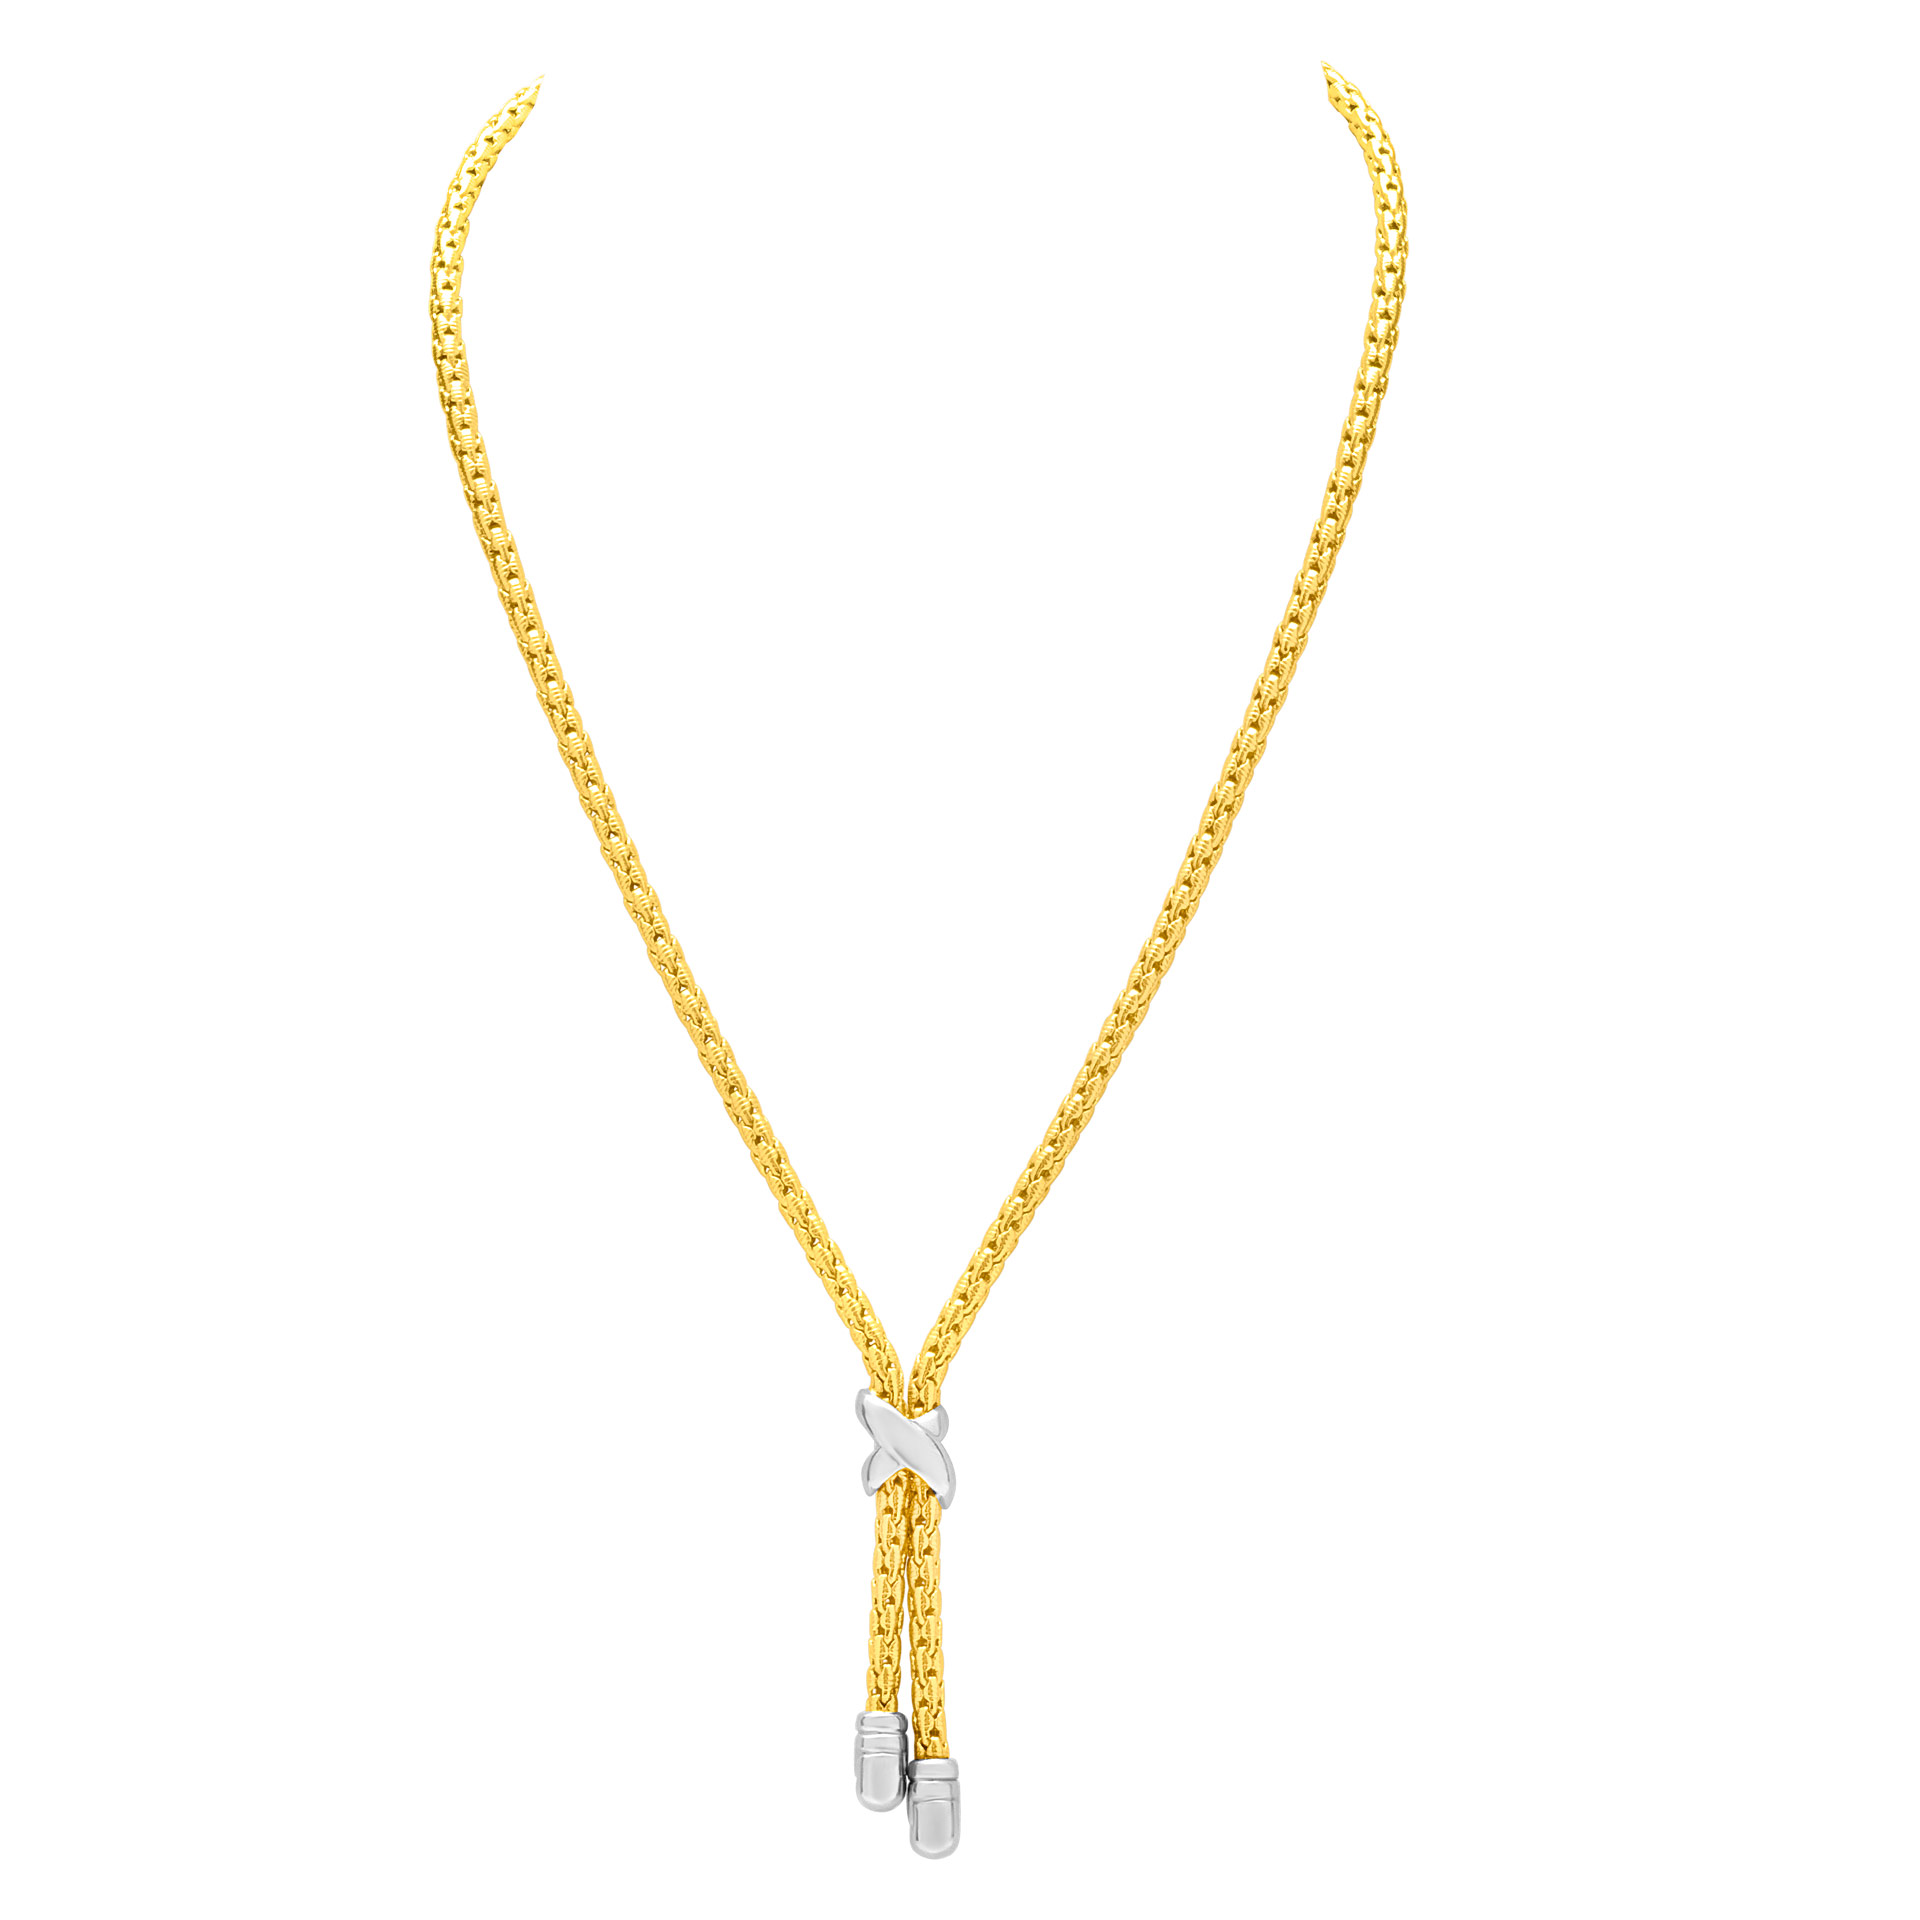 Distinctive Lariat style necklace in 18K yellow gold. image 2